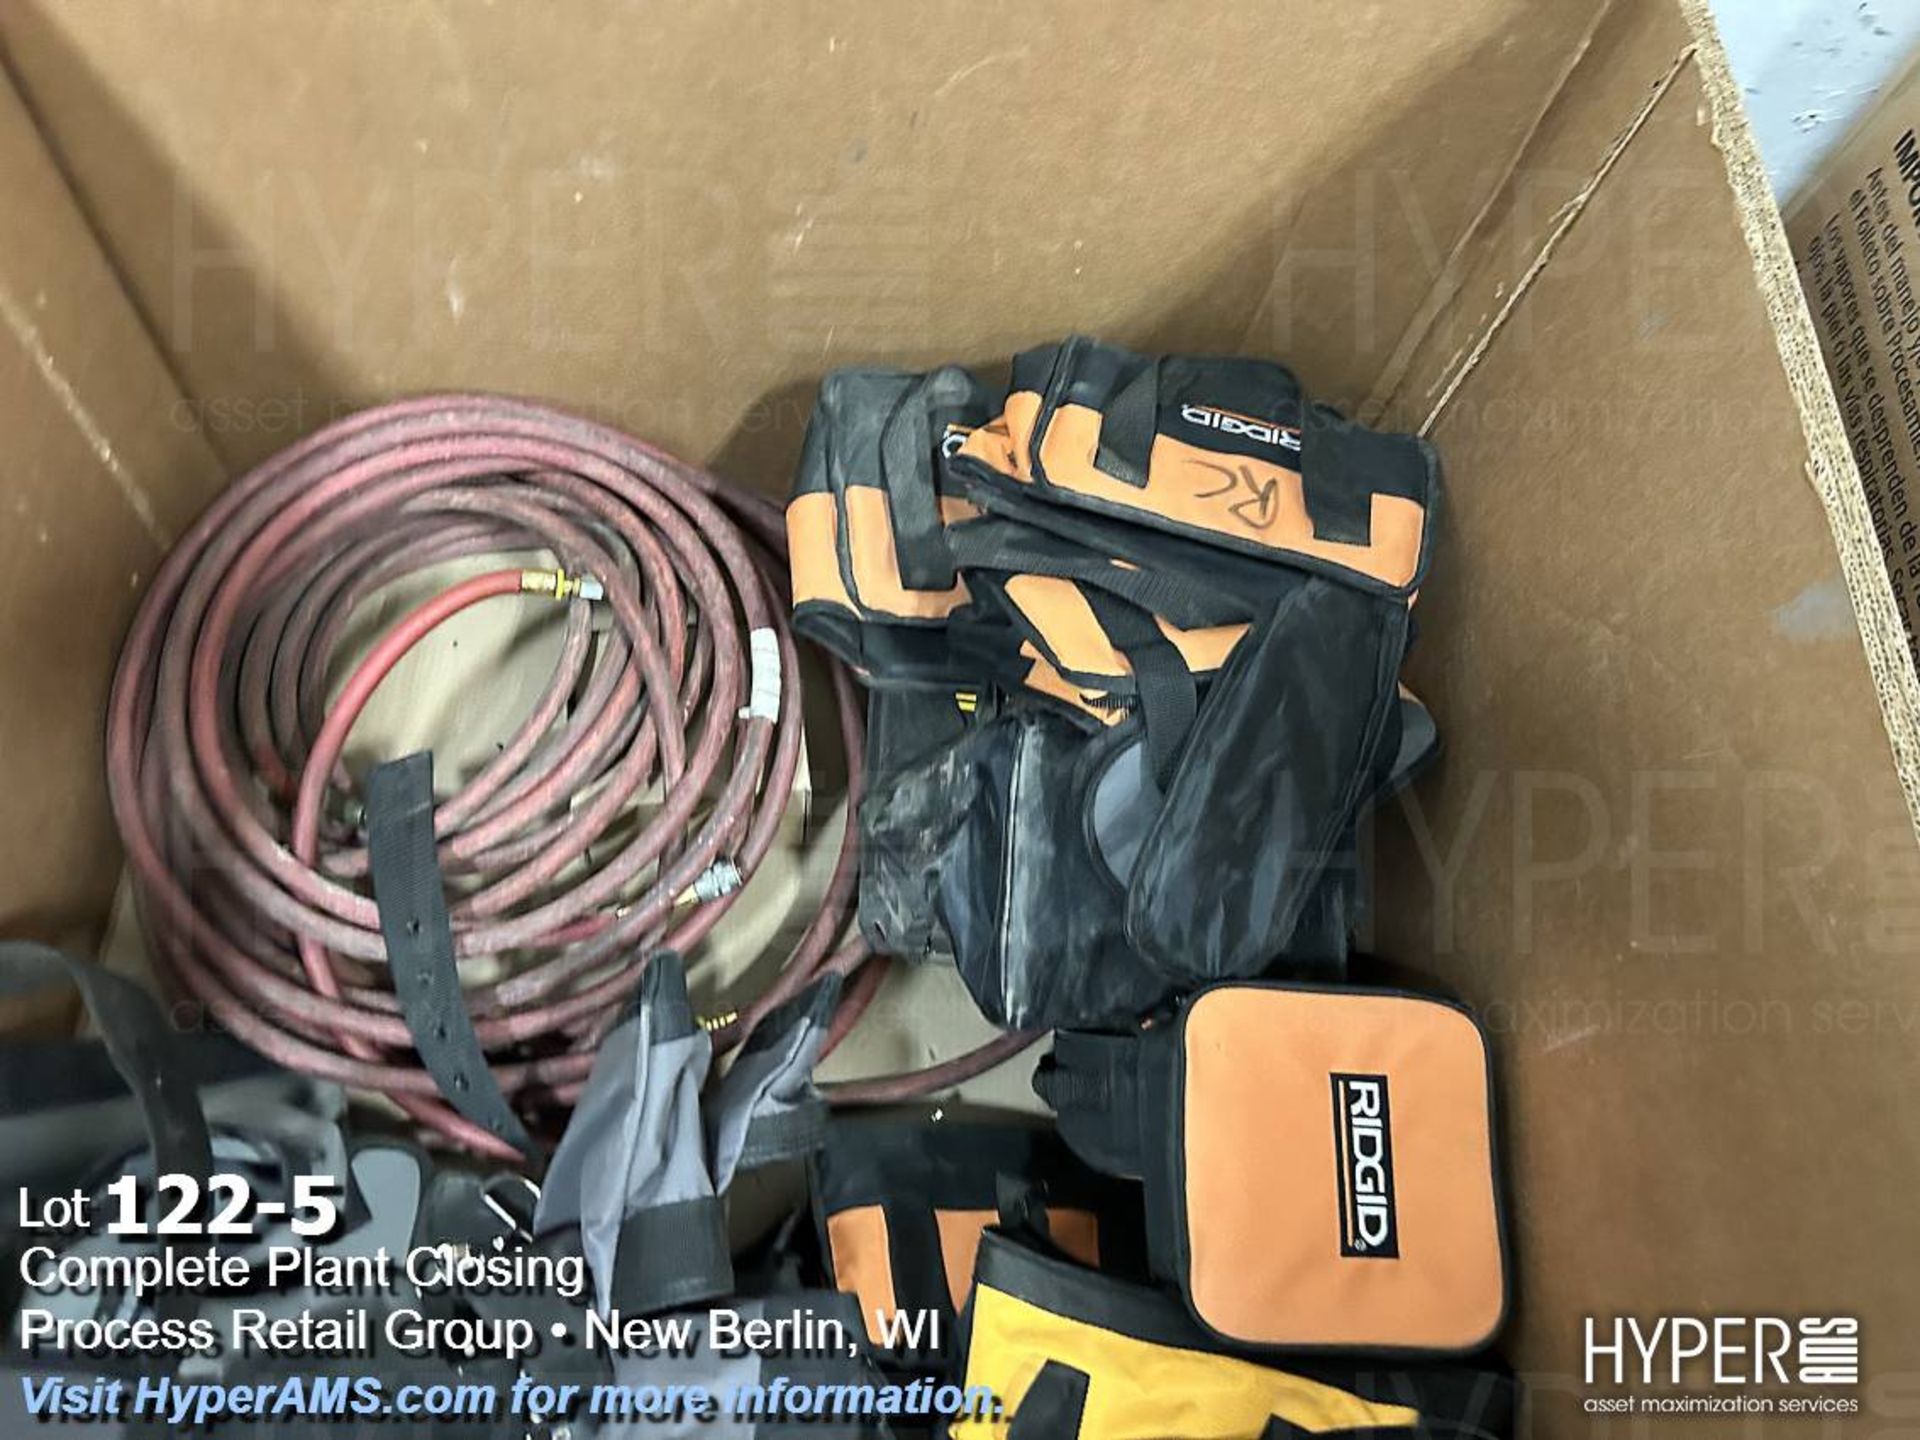 Air hose, tool belts, and tool bags - Image 5 of 5